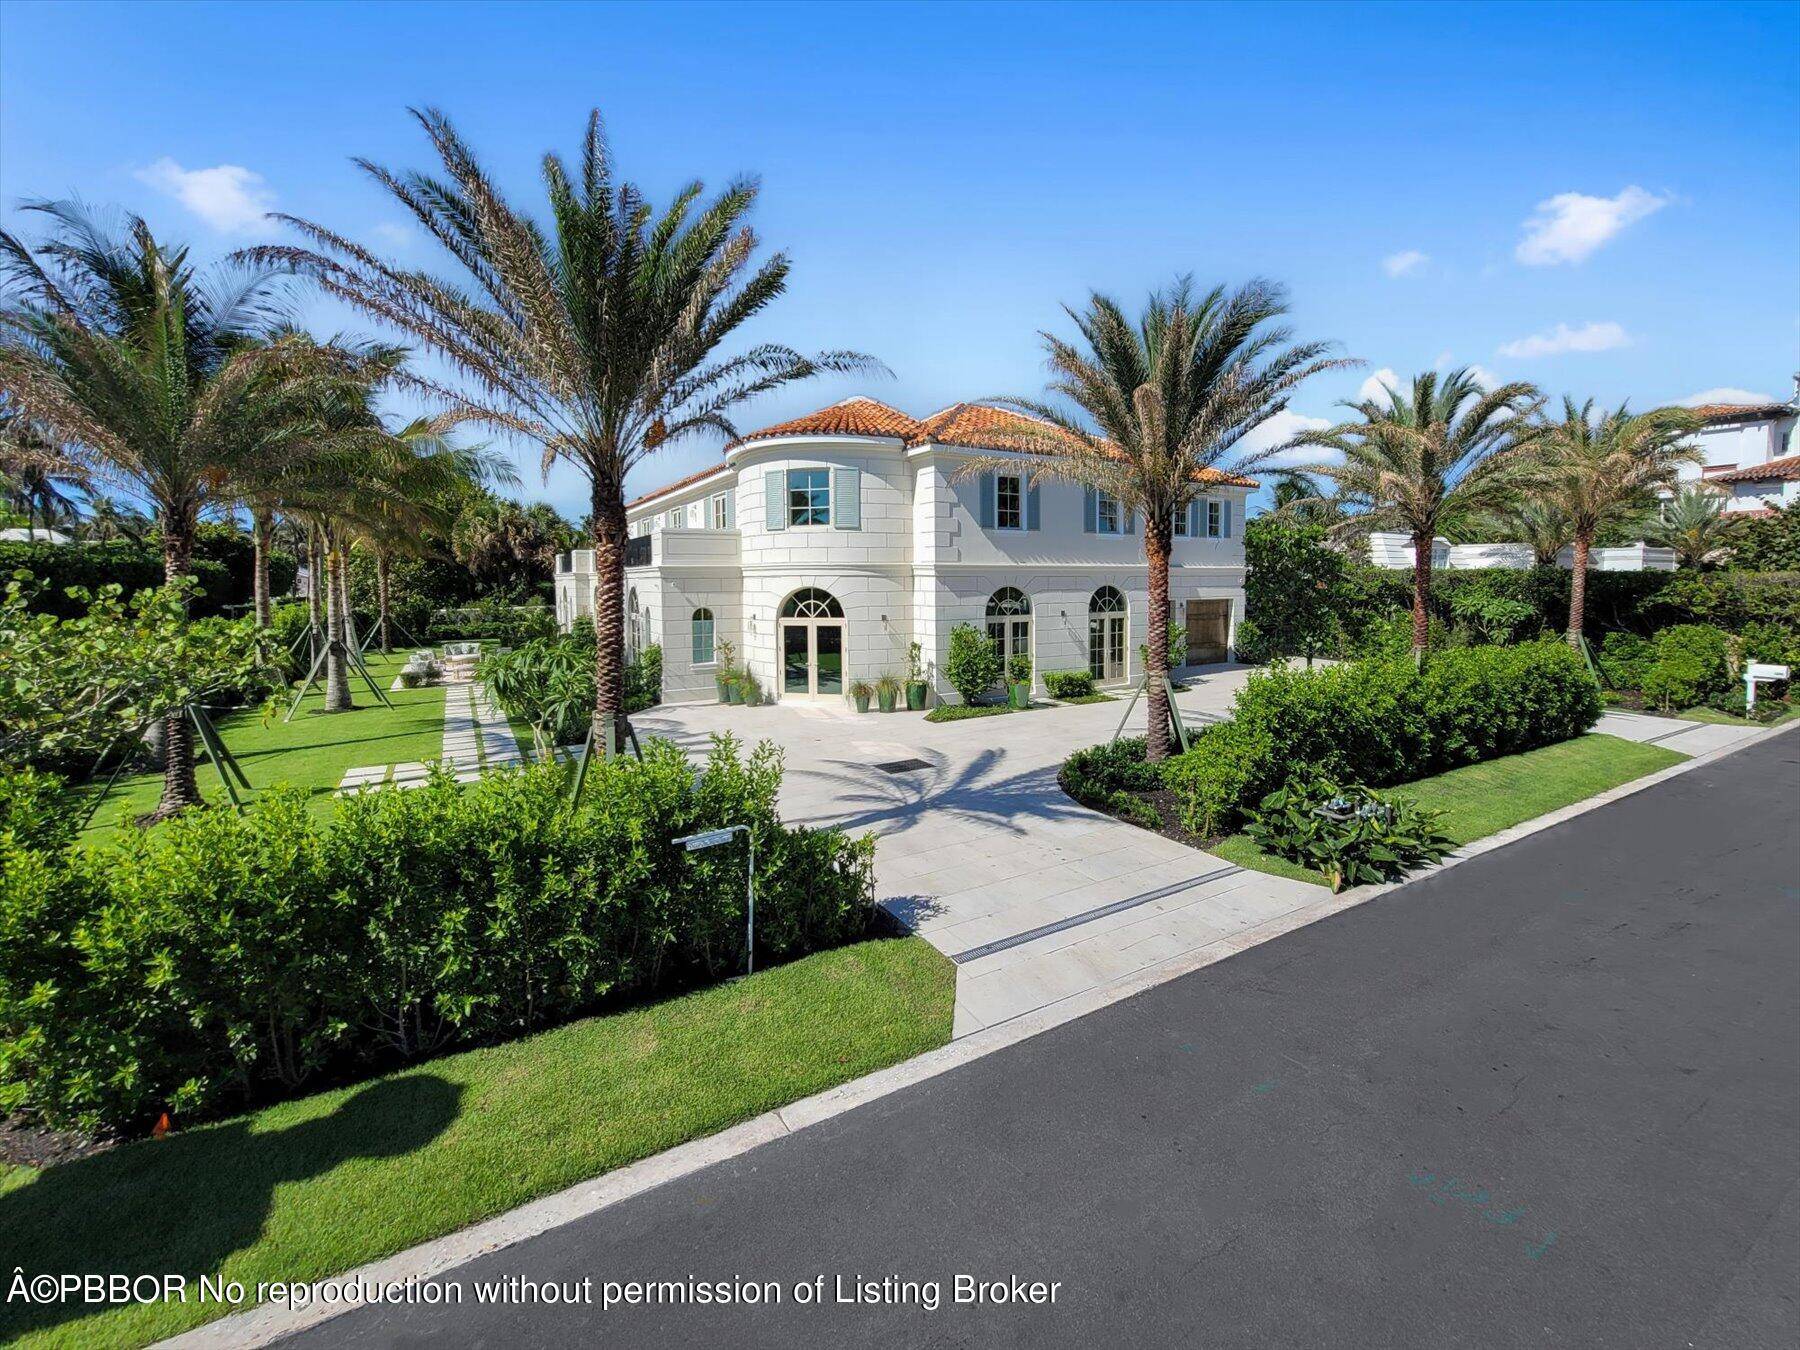 Recently completed and developed new construction by Todd Michael Glaser, this 5 bedroom 6.